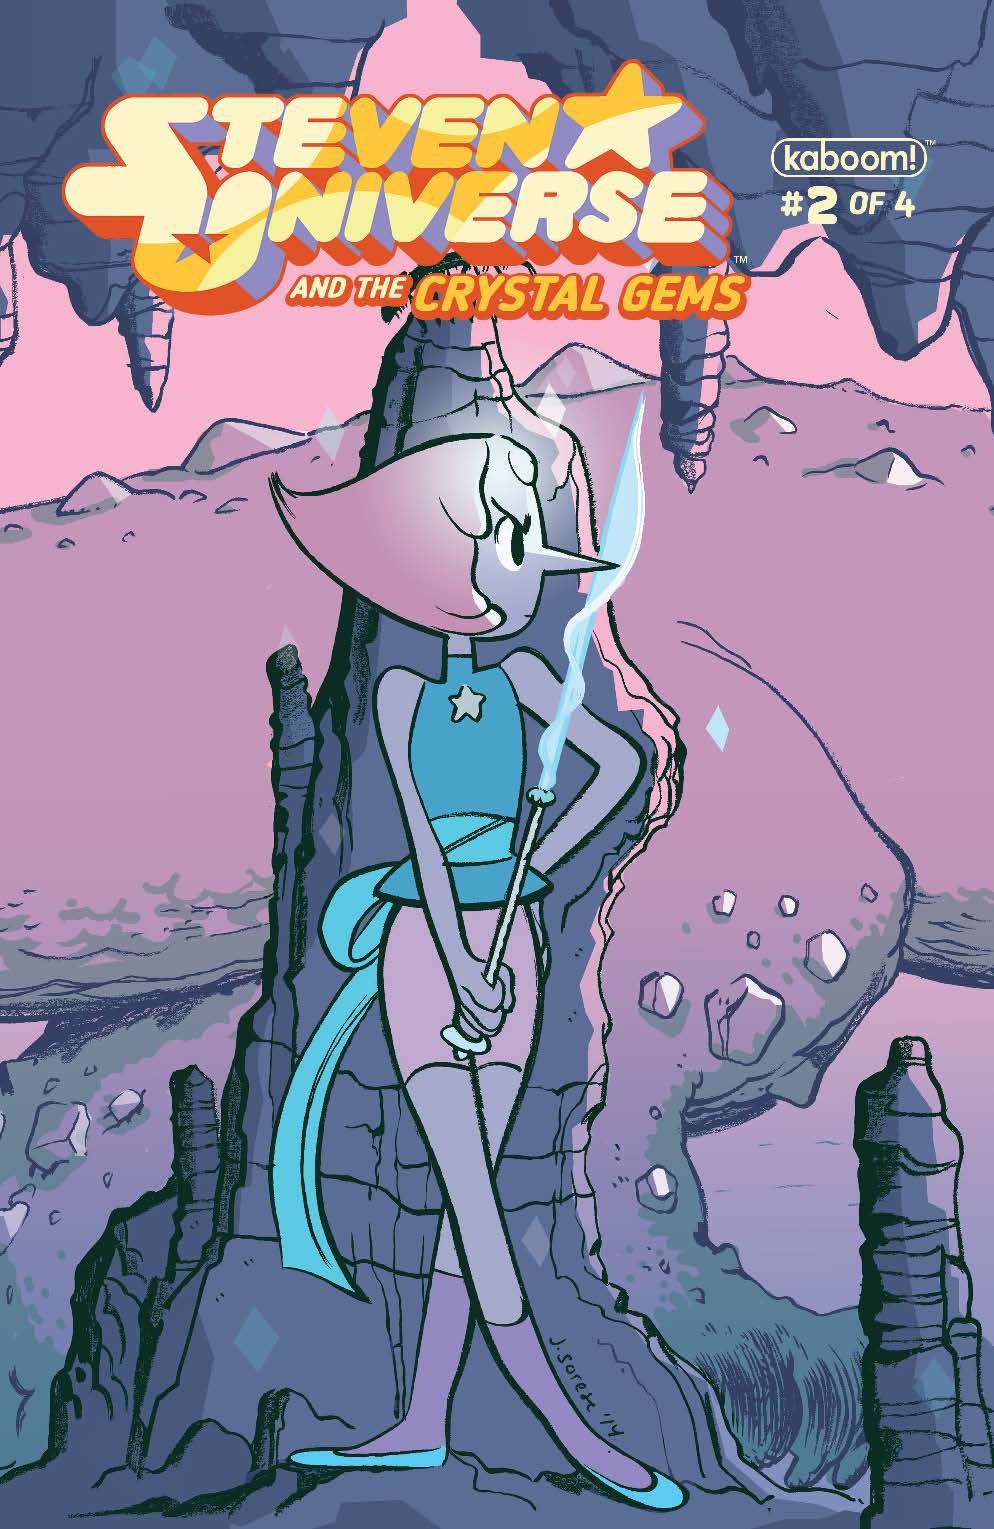 Steven Universe and the Crystal Gems #2 Preview